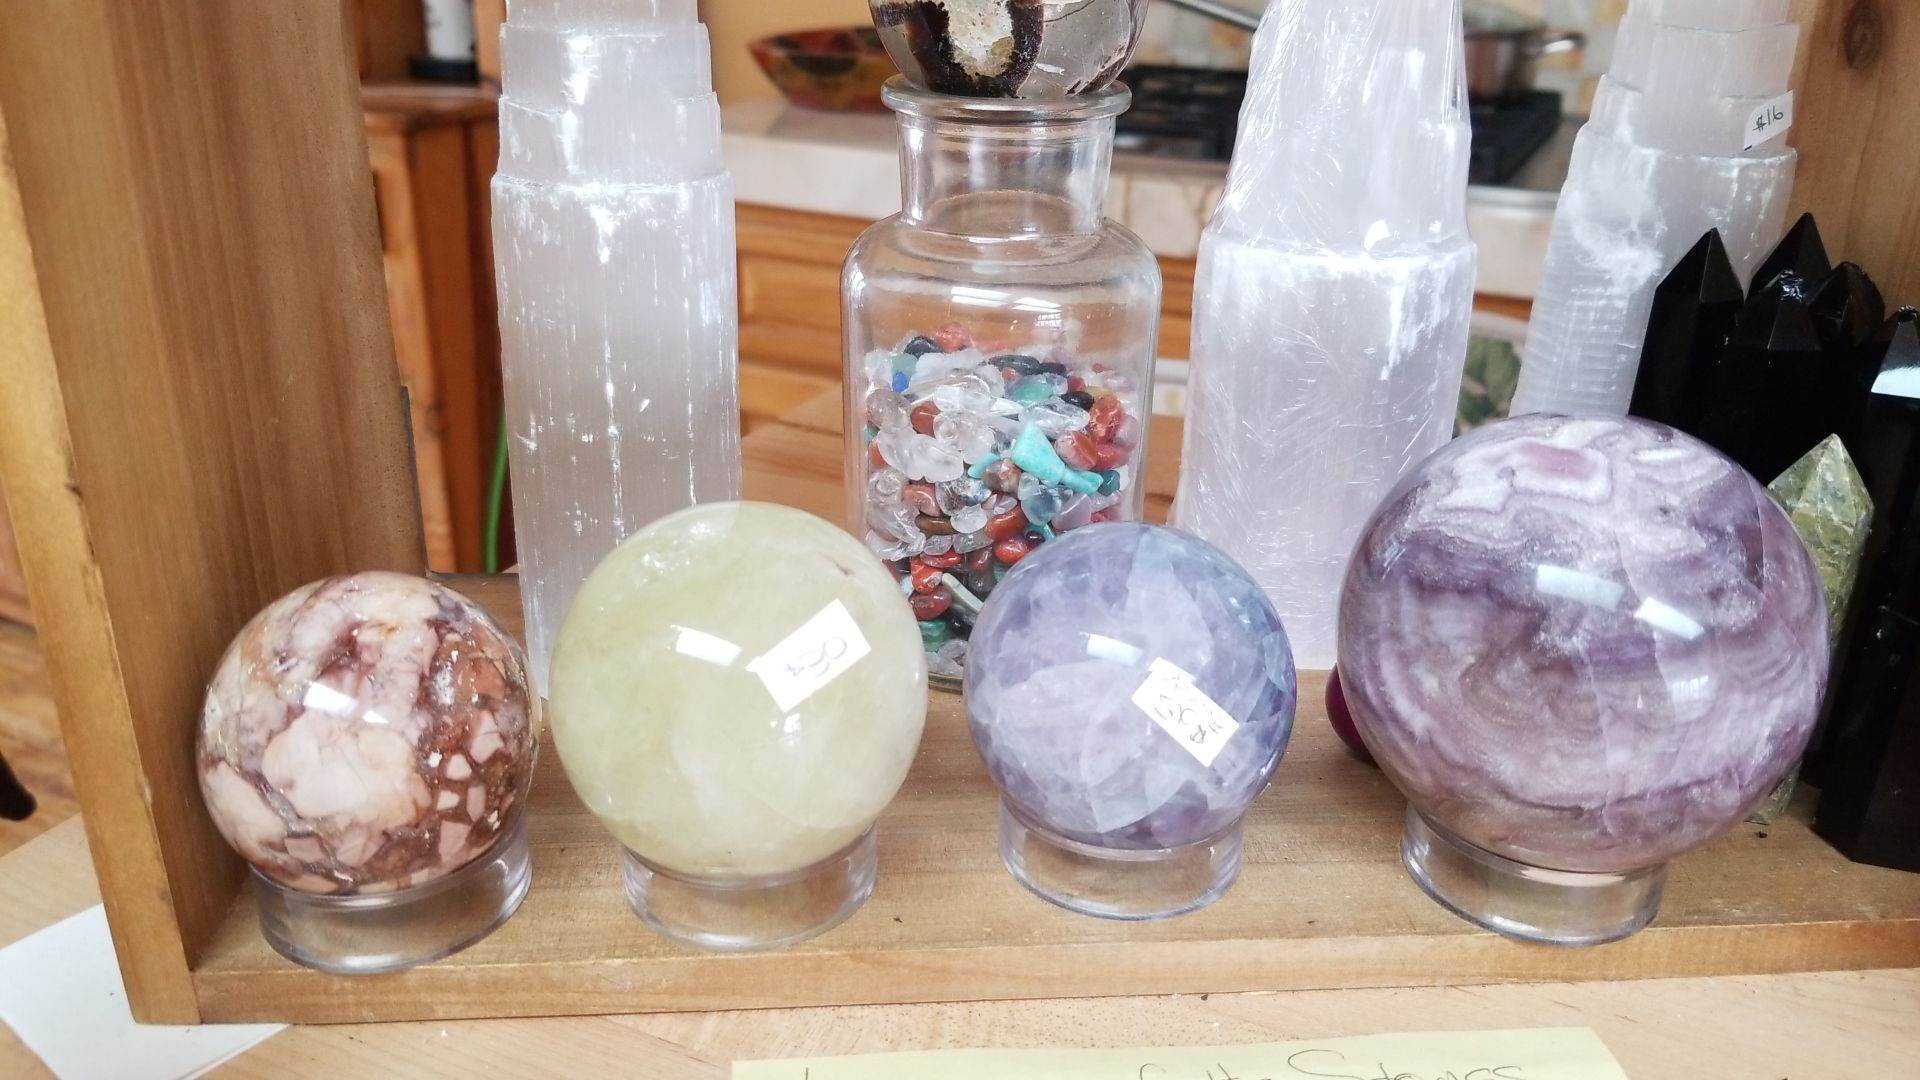 Many Crystal Spheres From $25 To $40